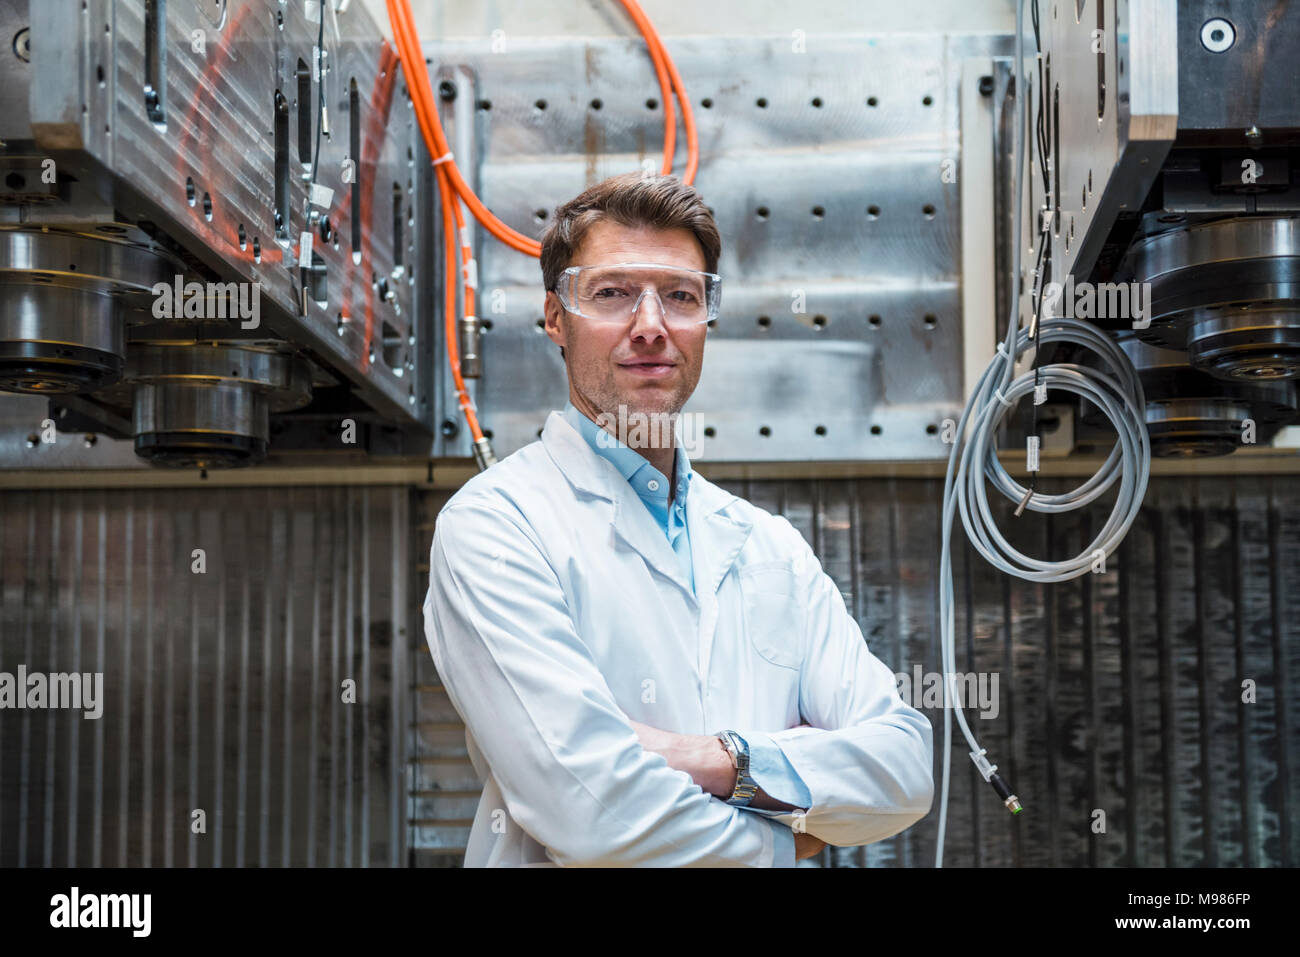 Portrait of man wearing lab coat and safety goggles at machine Stock Photo